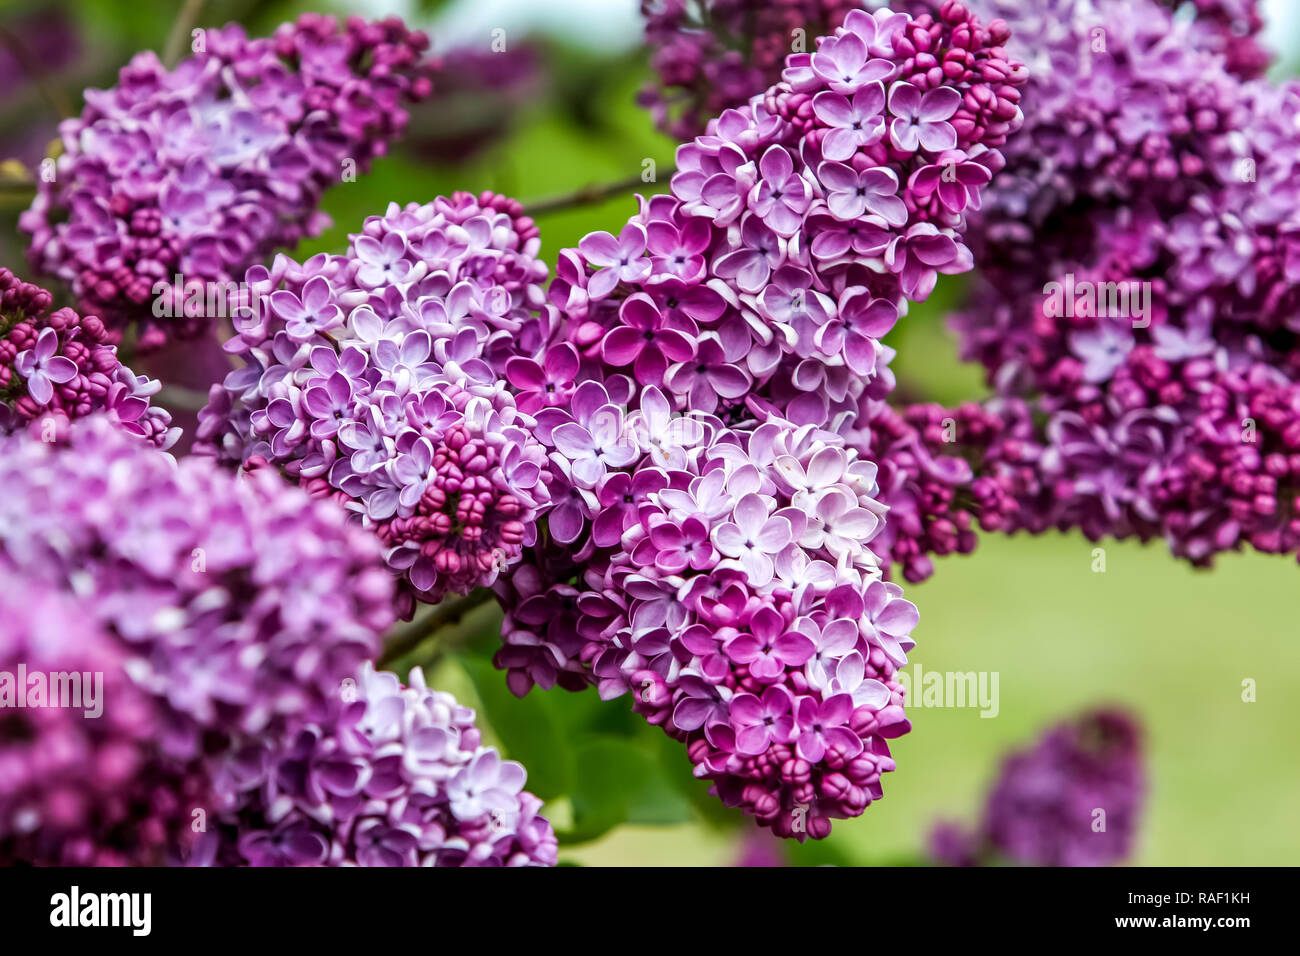 Blooming lilac bush in spring time. Blossoming lilac flowers. Flowering lilac bush in Latvia. Blooming pink lilac flowers in spring season. Stock Photo